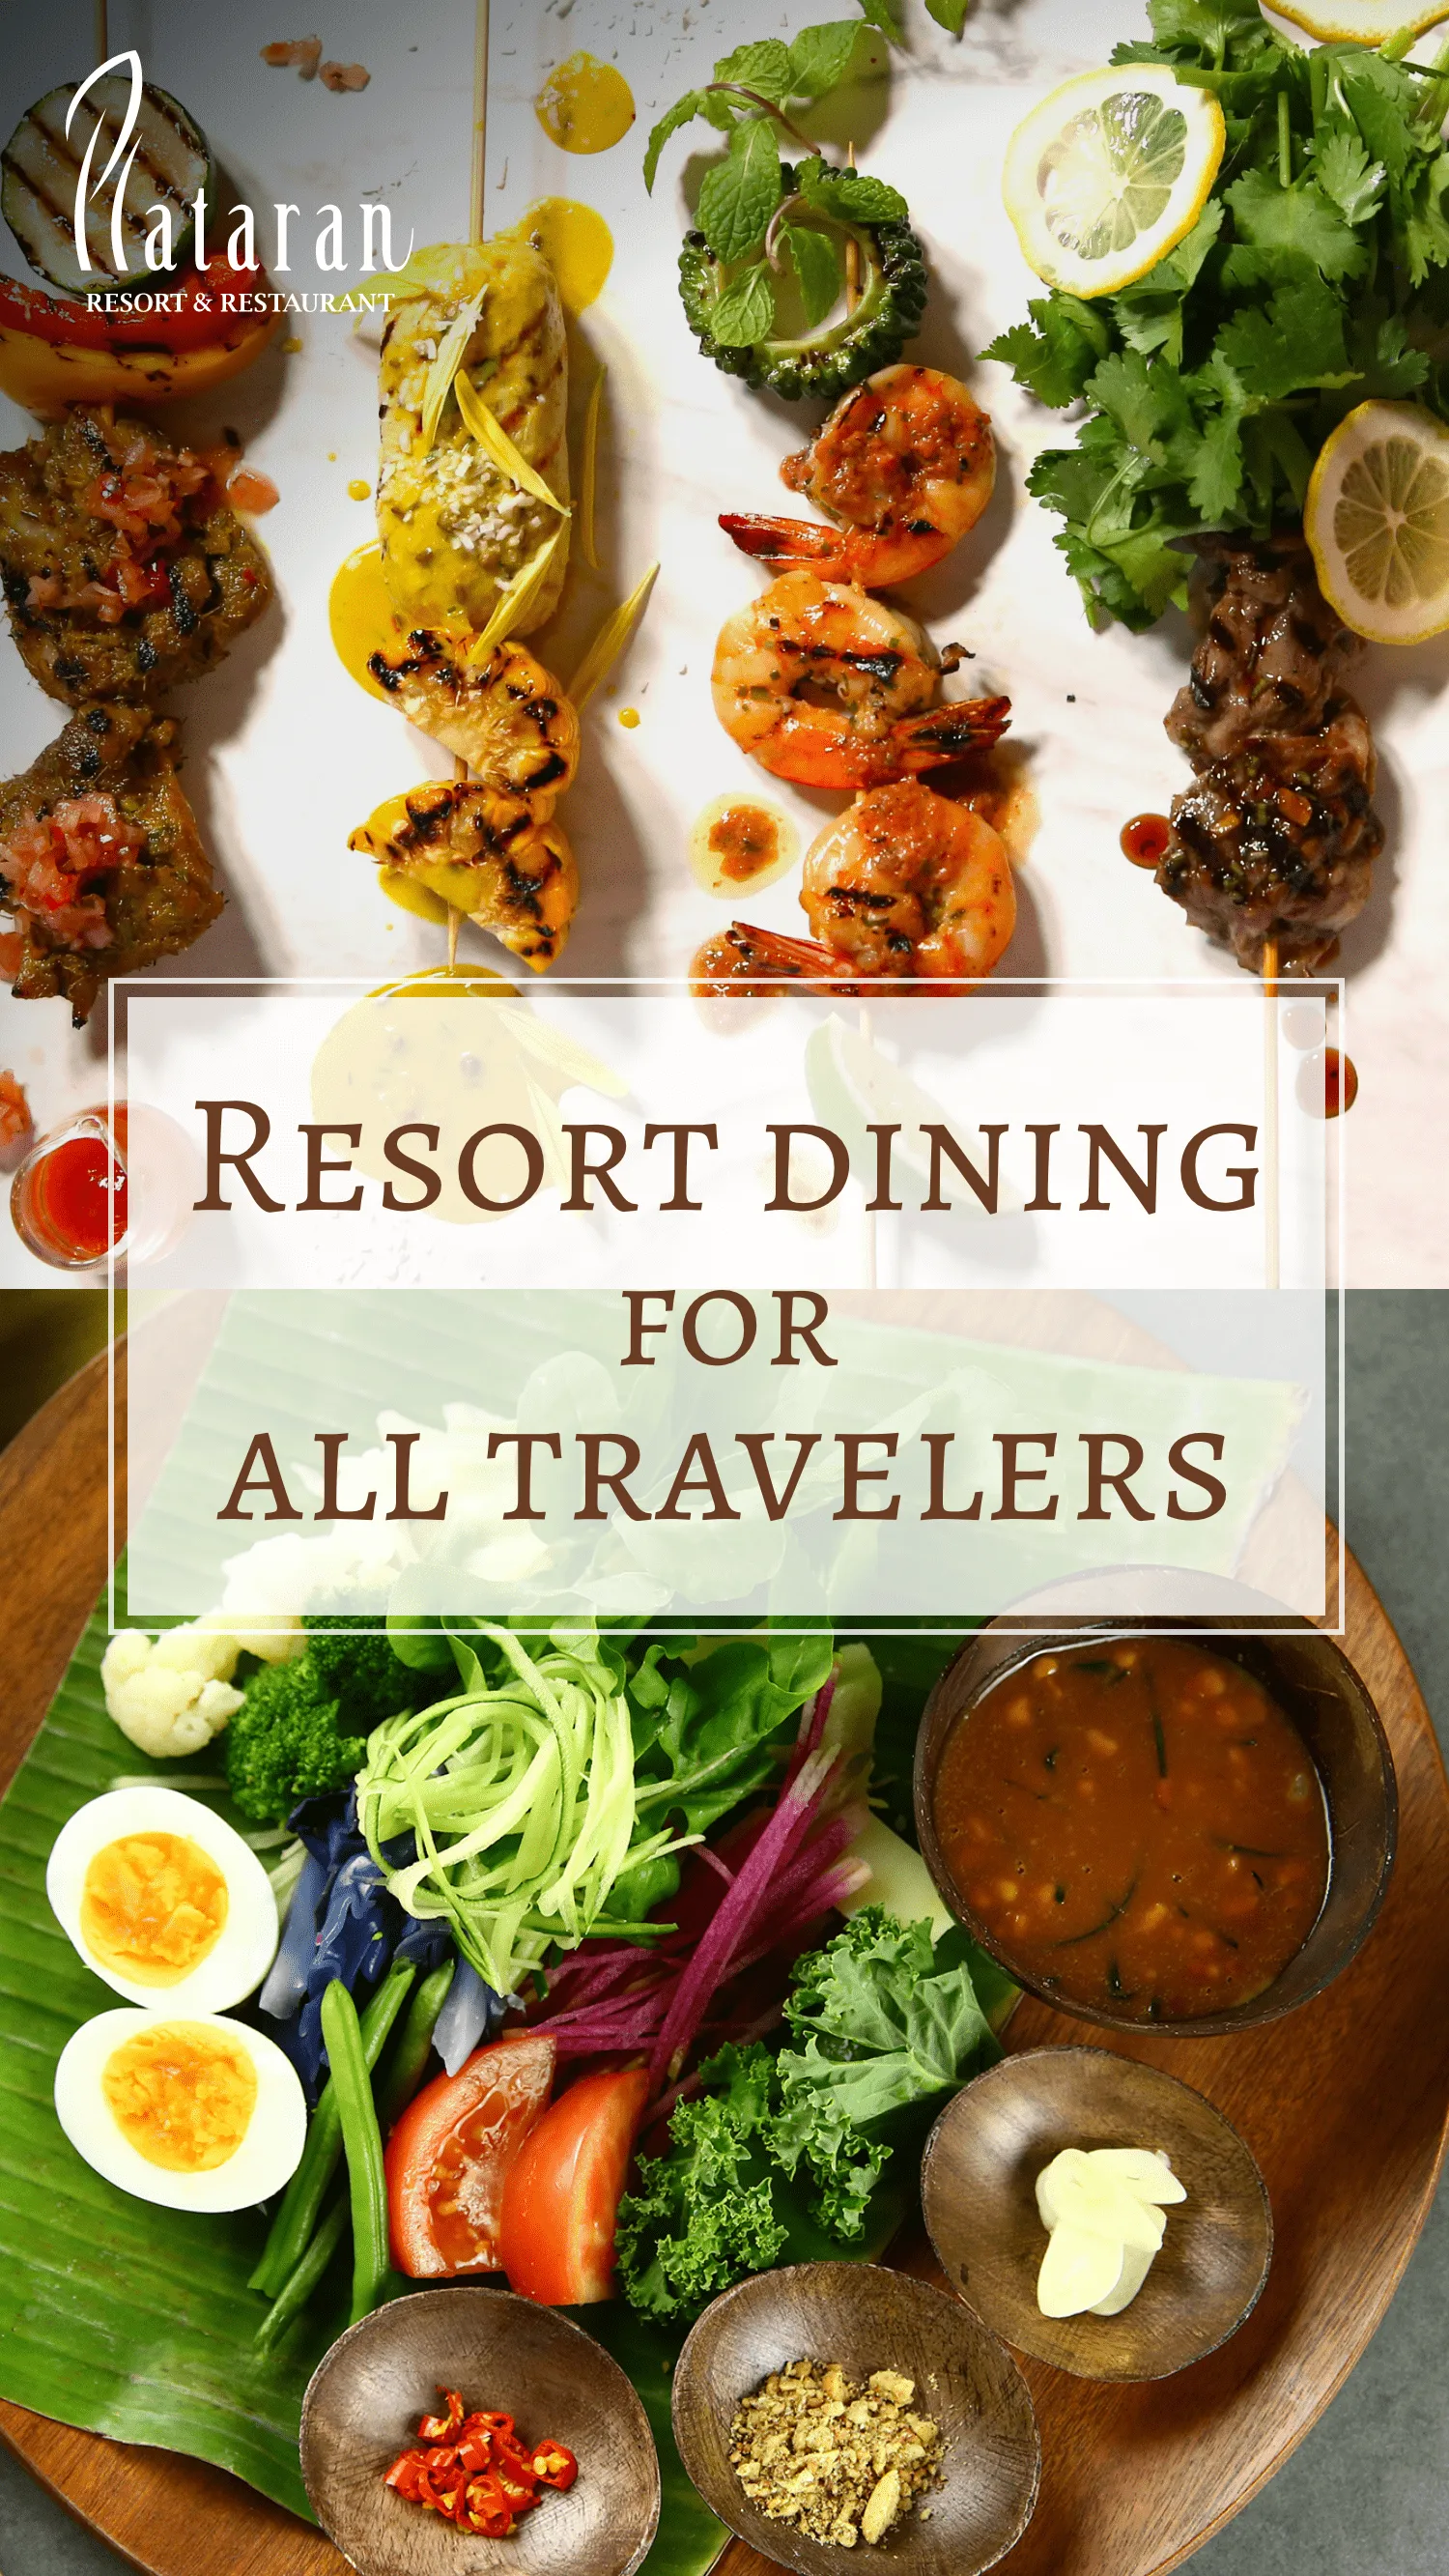 Resort dining for all travelers